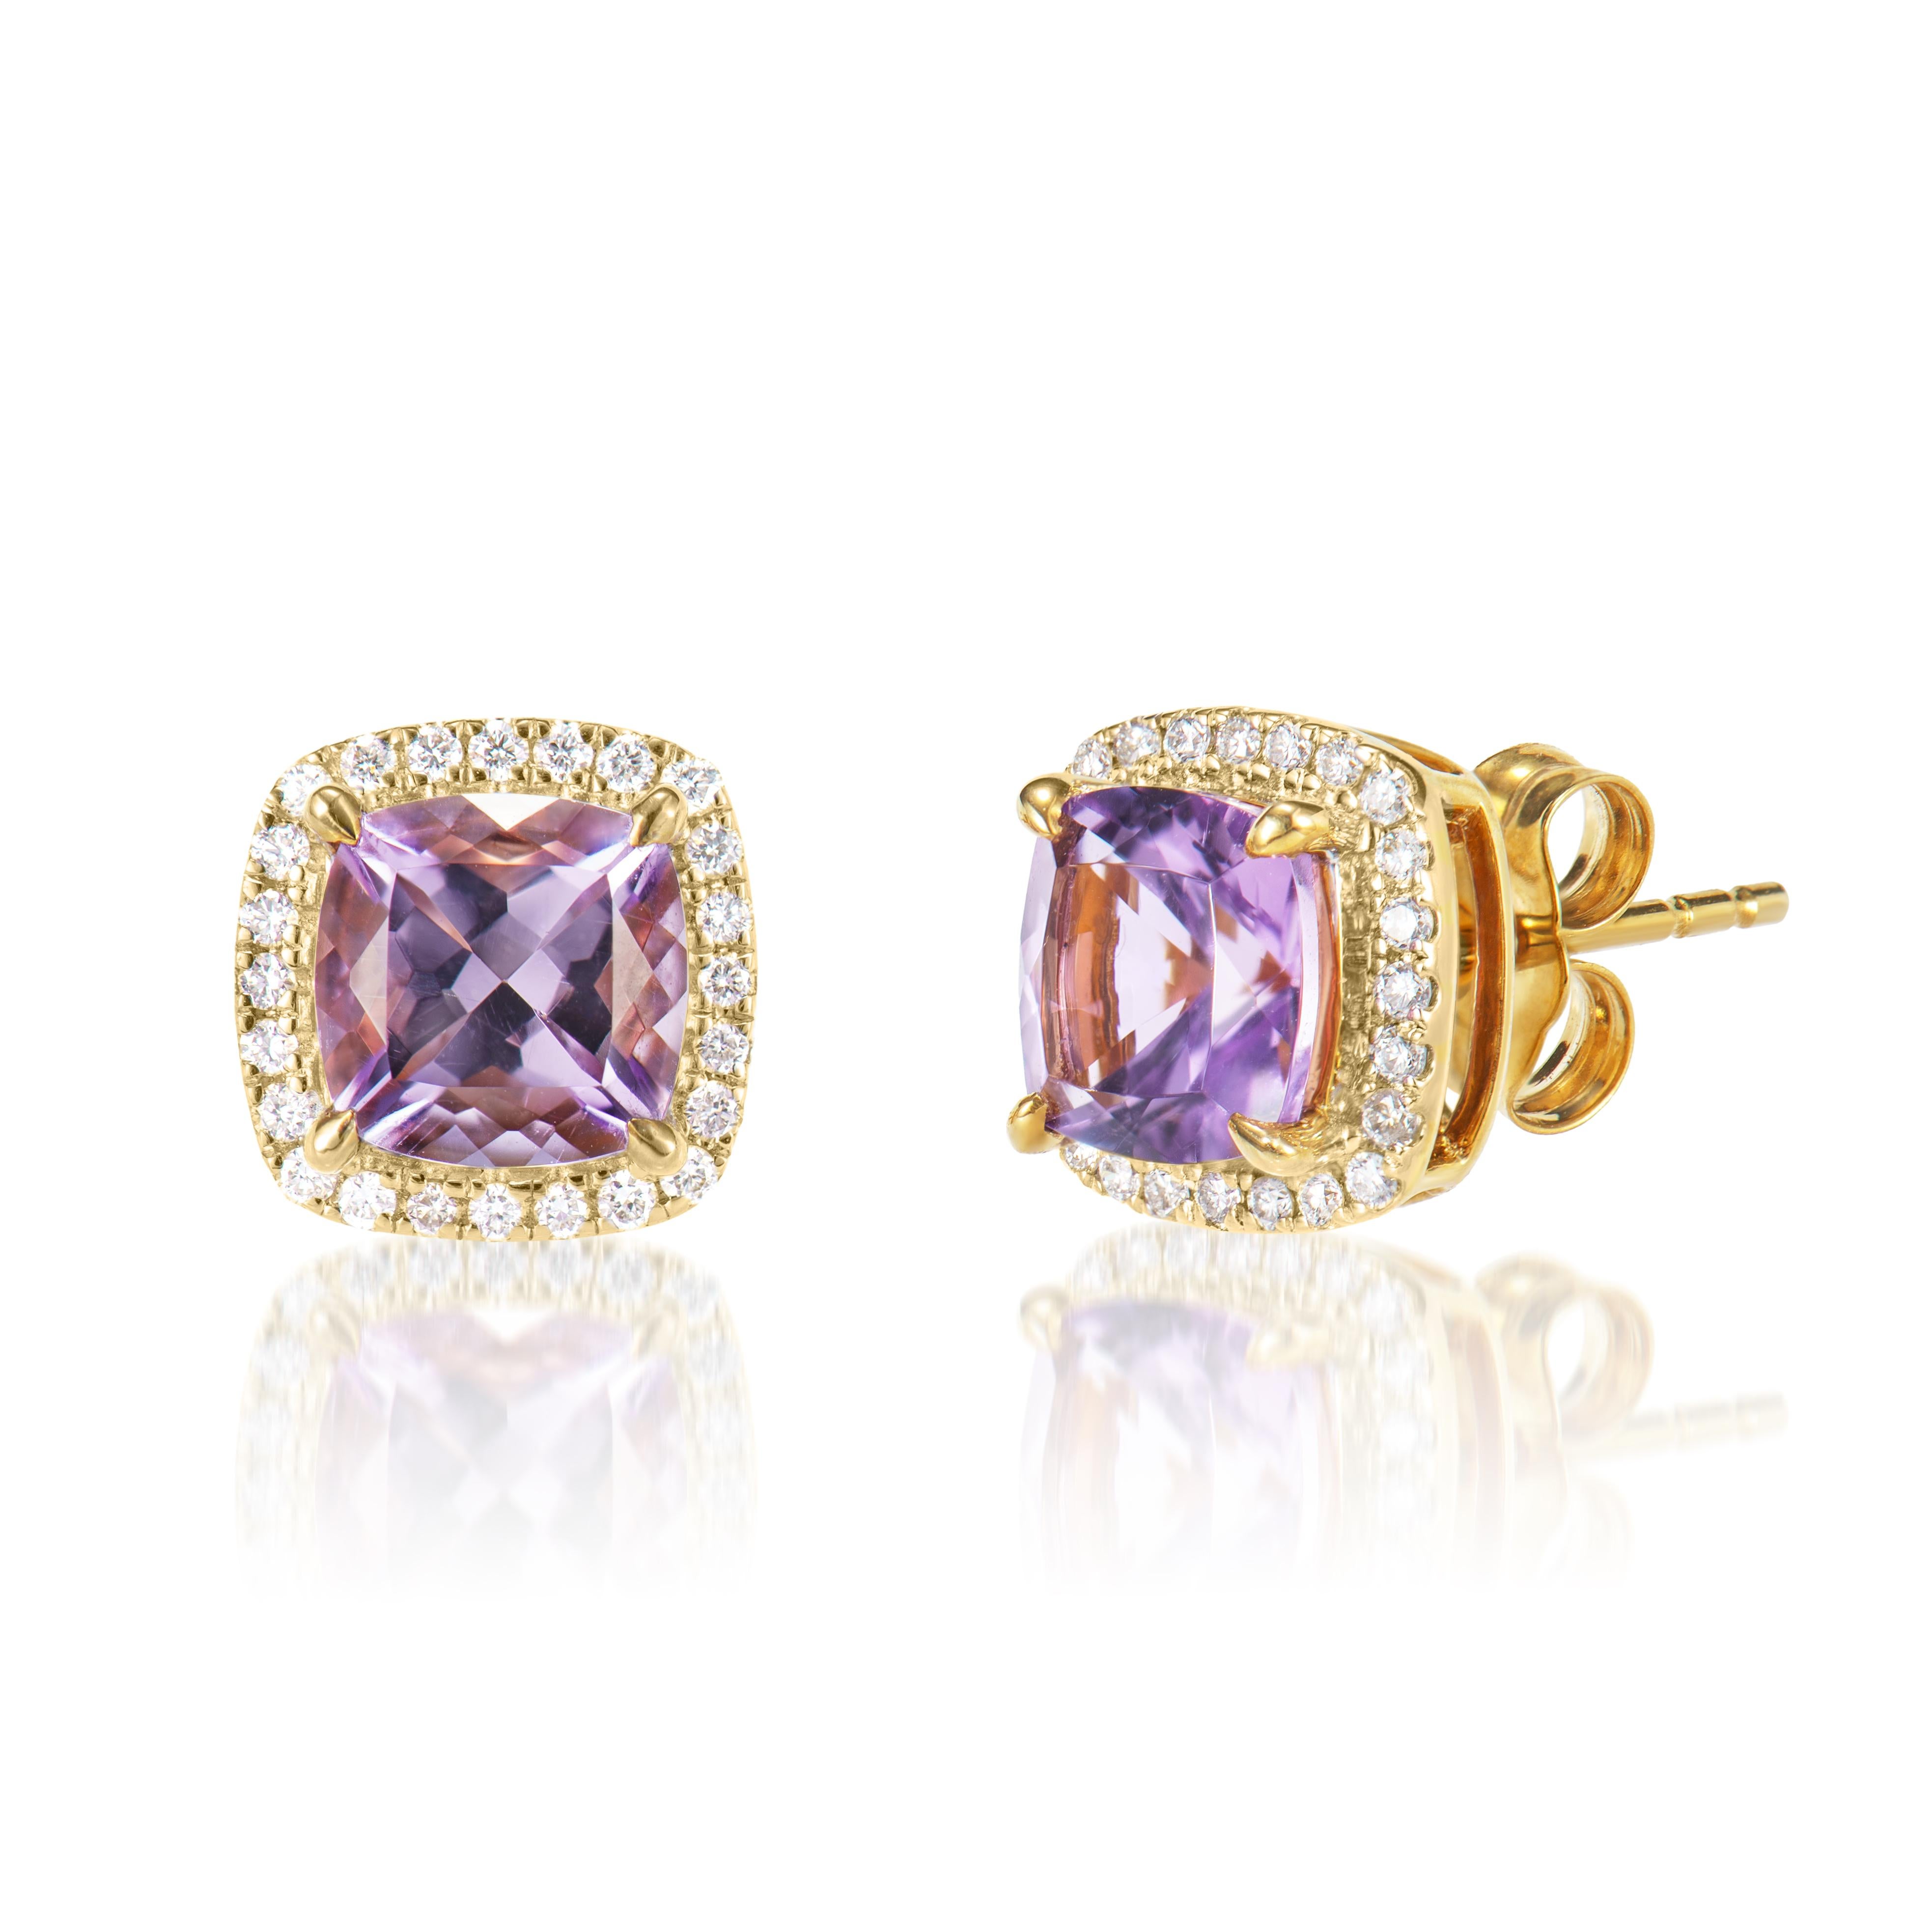 Cushion Cut 1.76 Carat Amethyst Stud Earrings in 18Karat Yellow Gold with White Diamond. For Sale